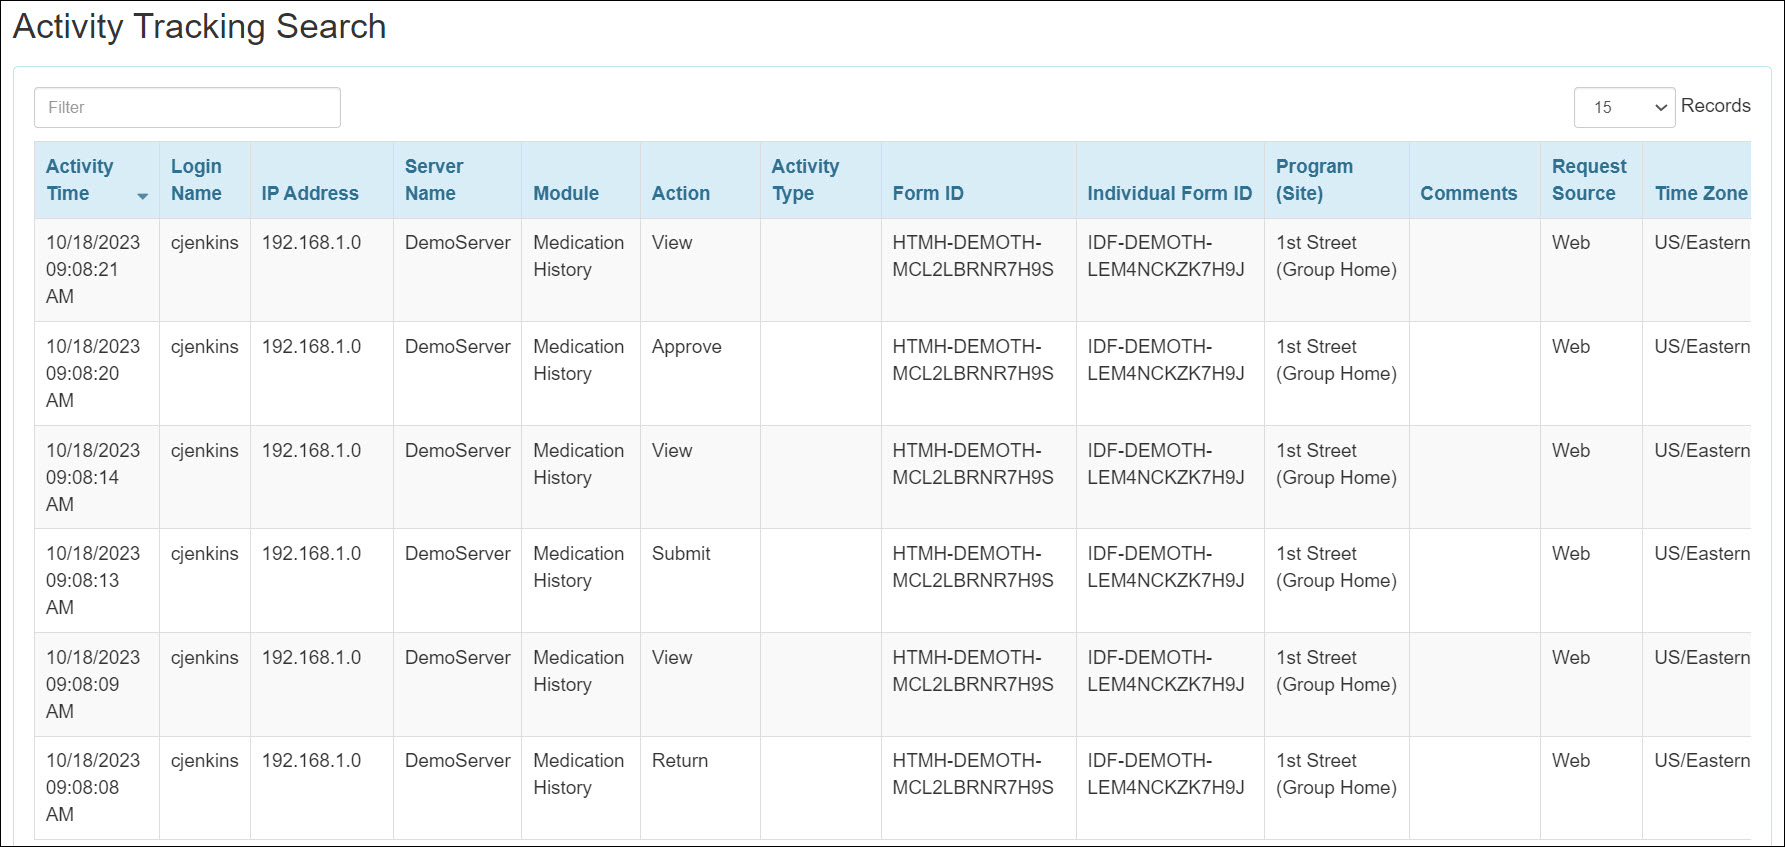 Screenshot showing the Activity Tracking search result for MH.